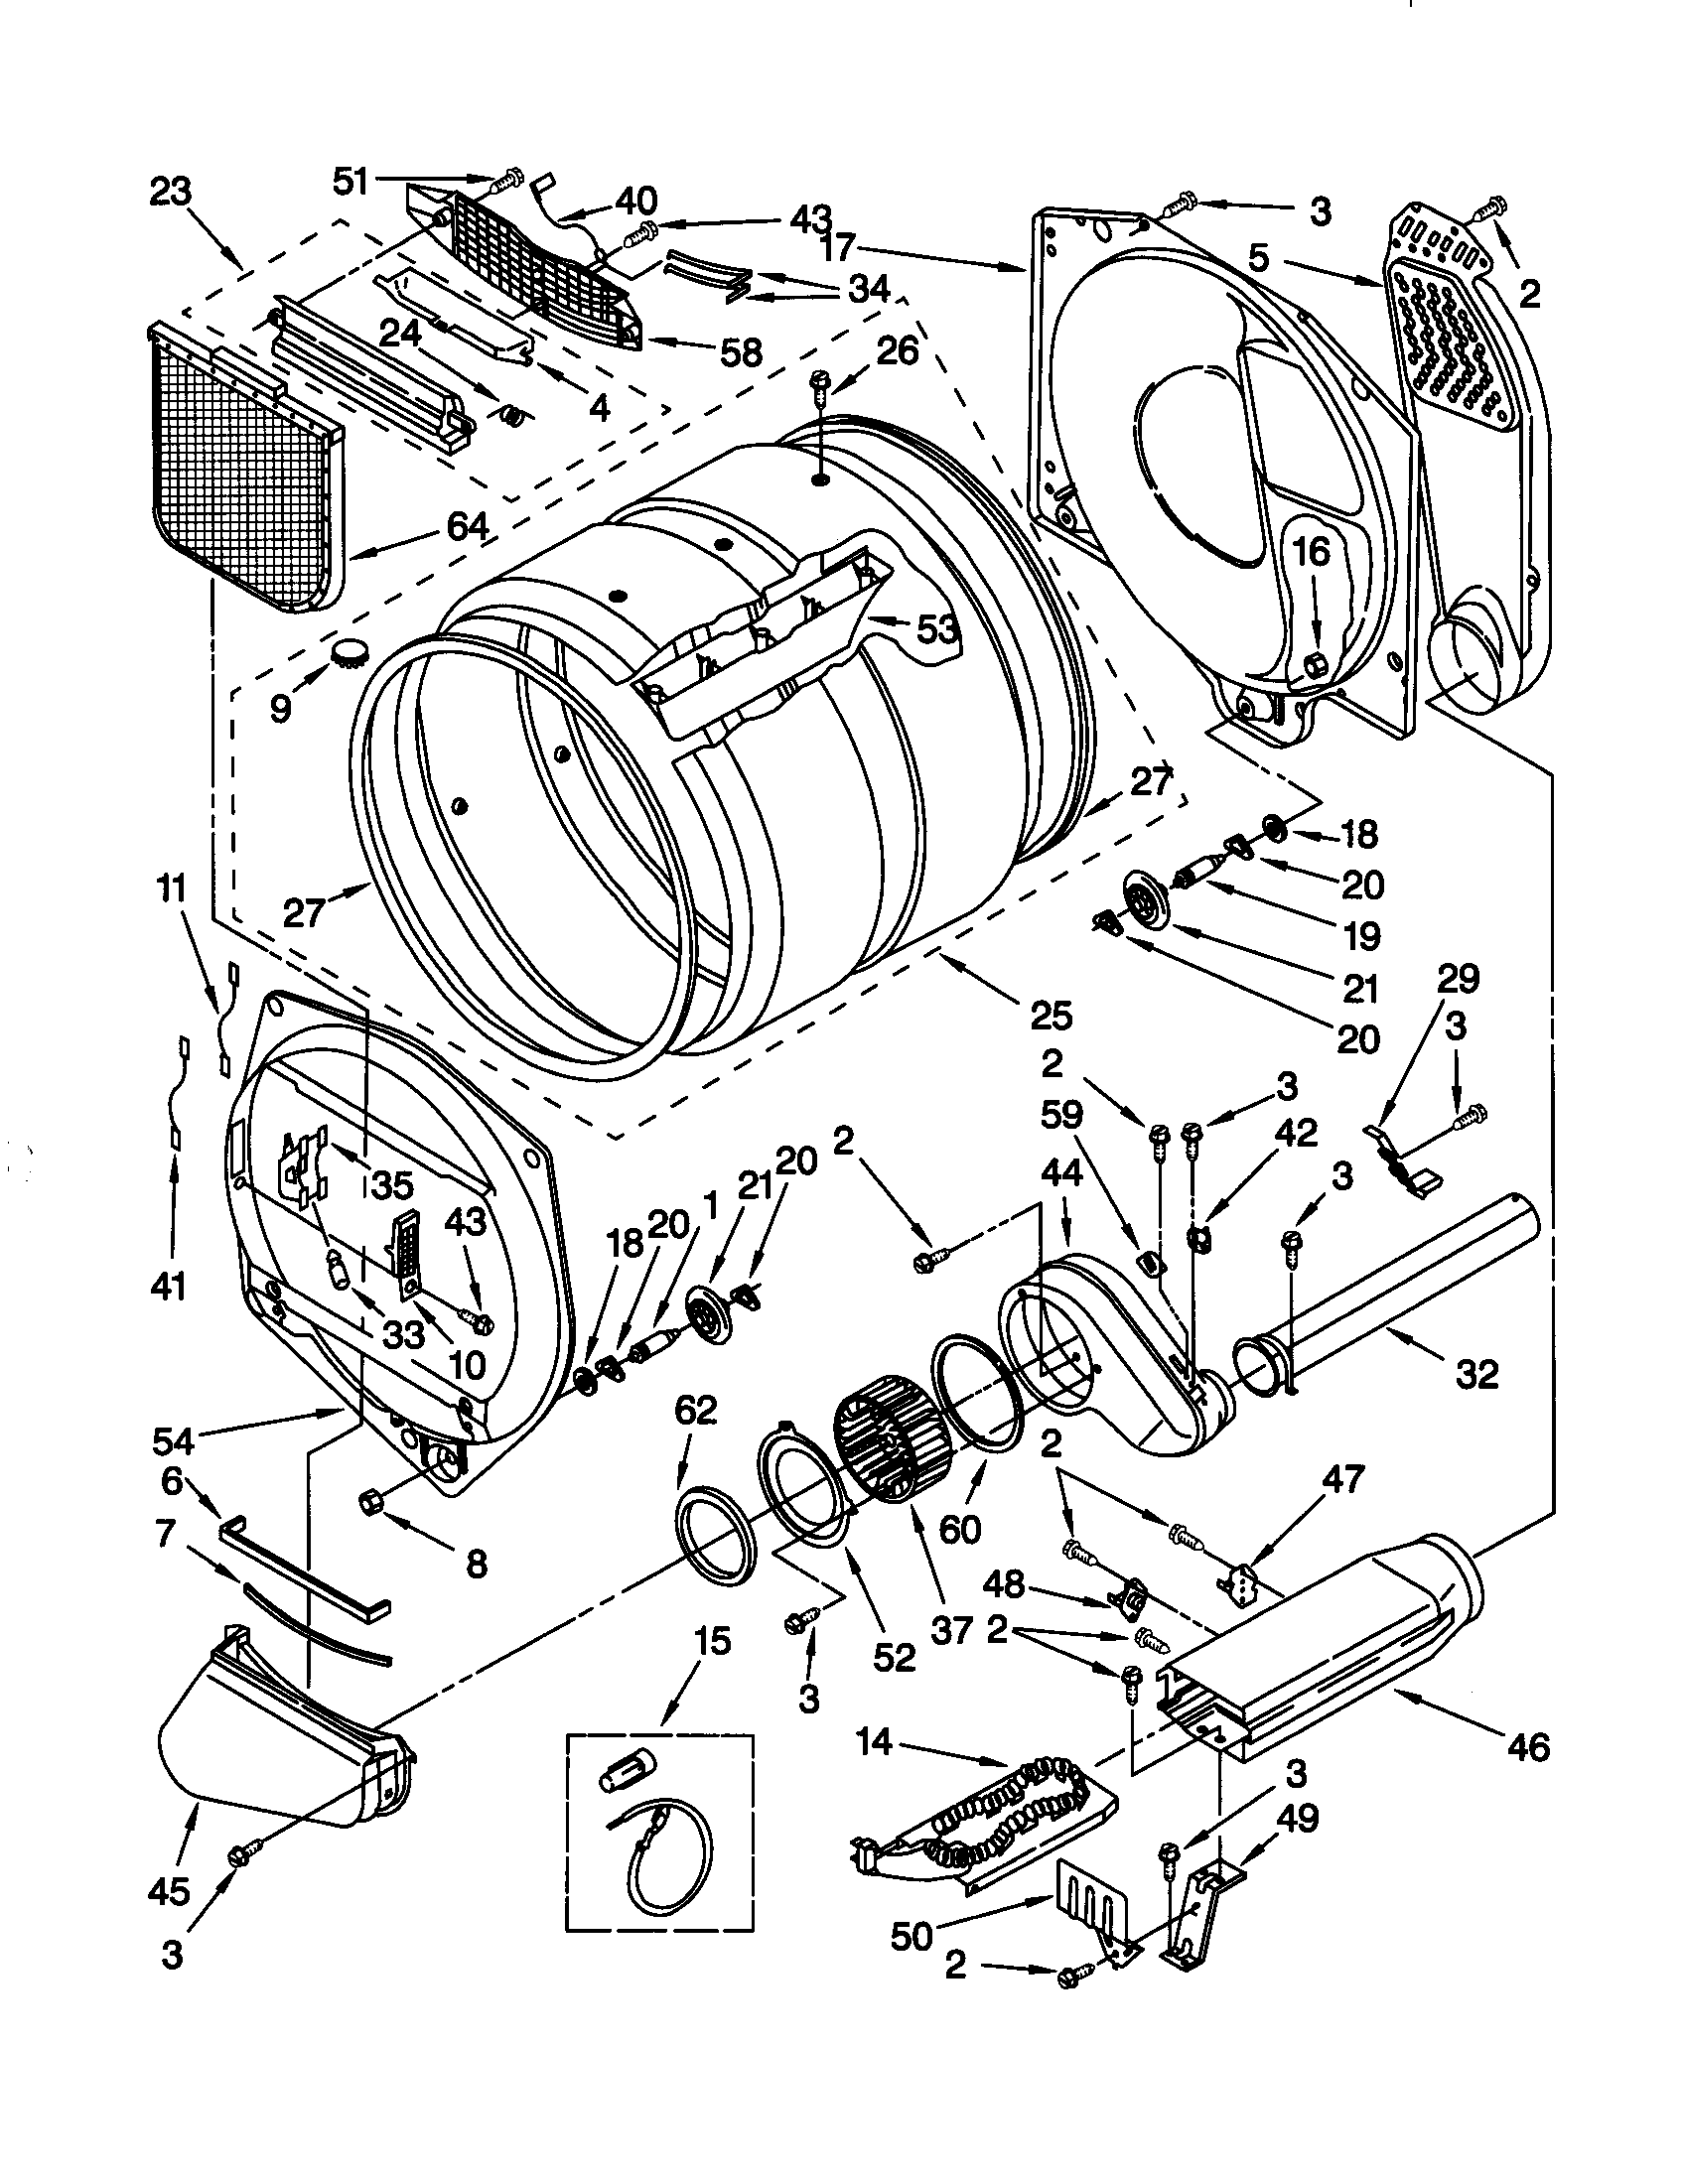 Kenmore Dryer Thermostat Wiring Diagram from c.searspartsdirect.com